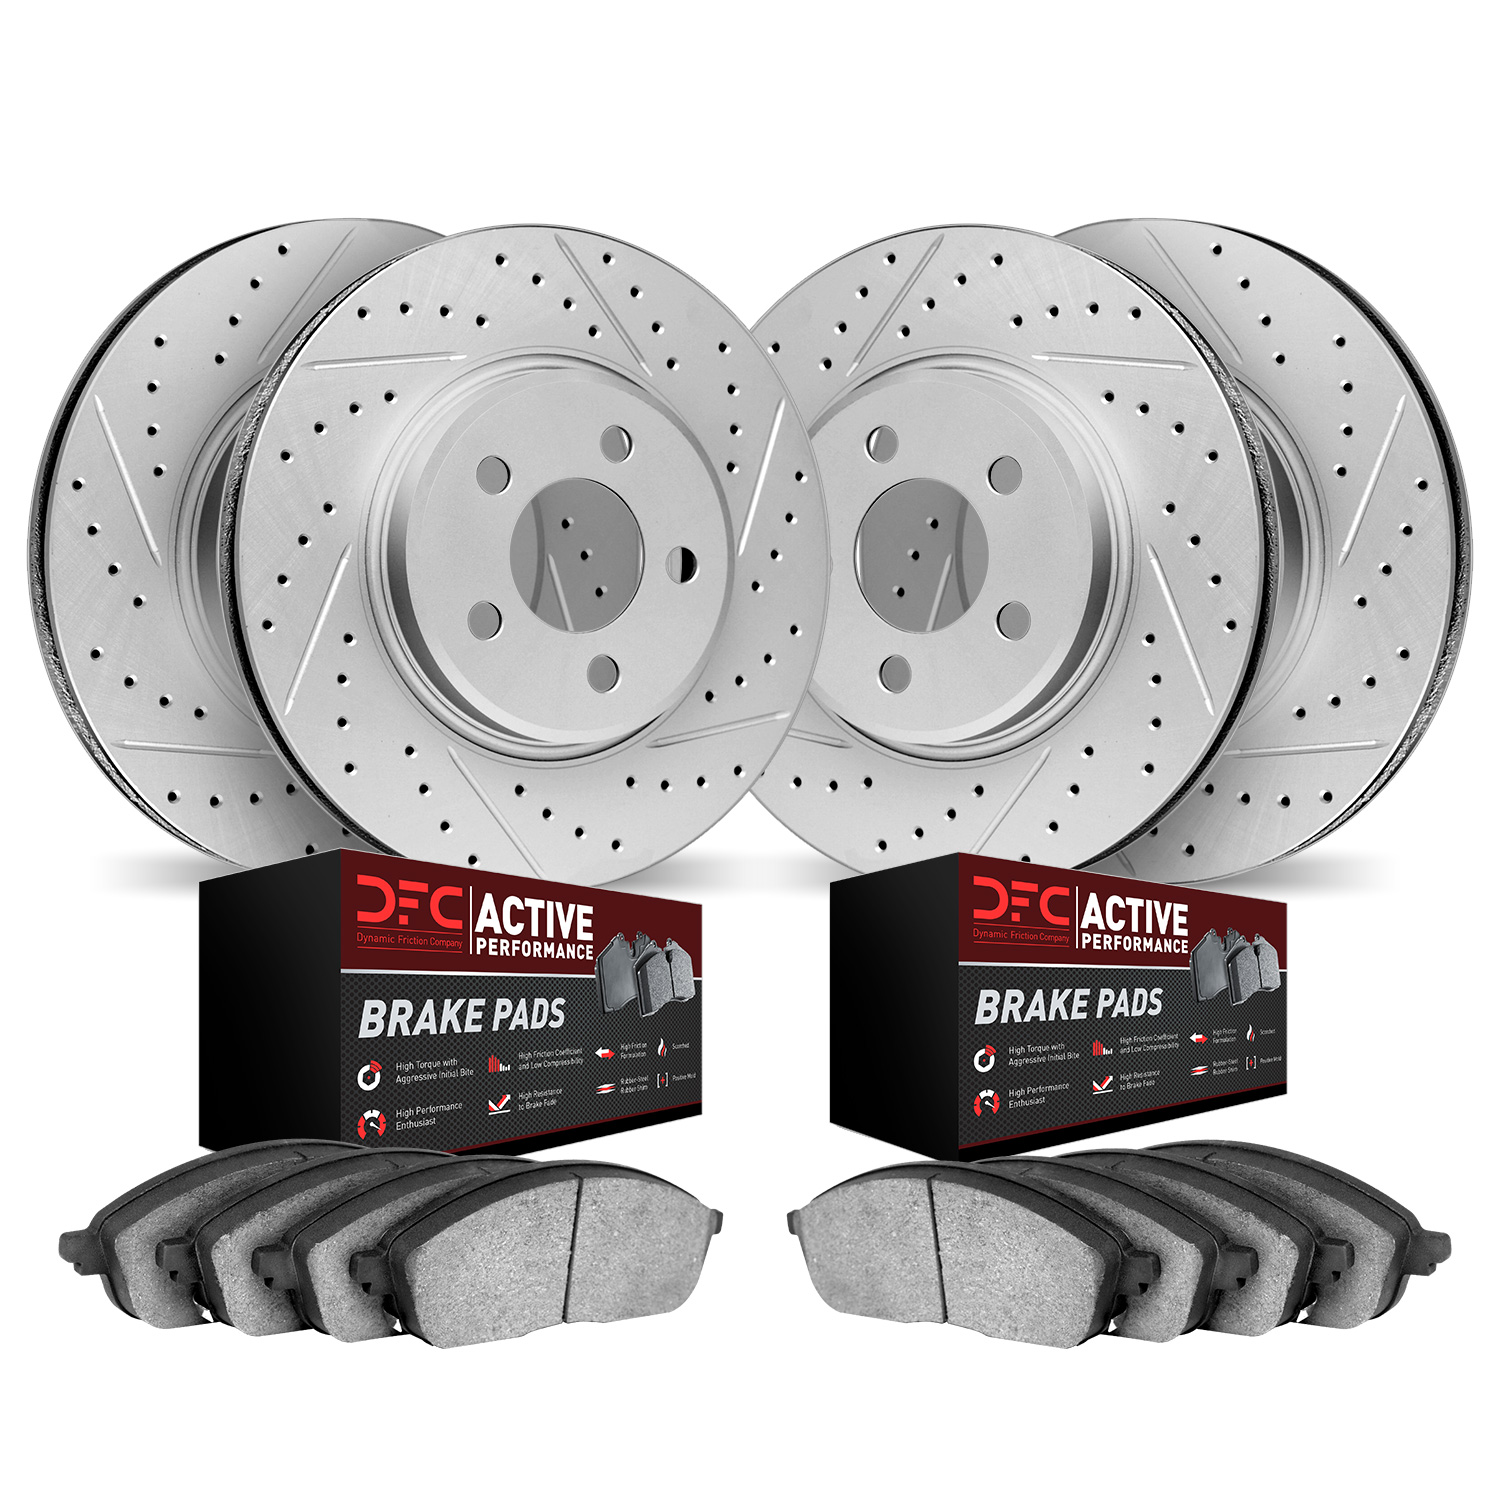 2704-31087 Geoperformance Drilled/Slotted Brake Rotors with Active Performance Pads Kit, 2007-2015 BMW, Position: Front and Rear